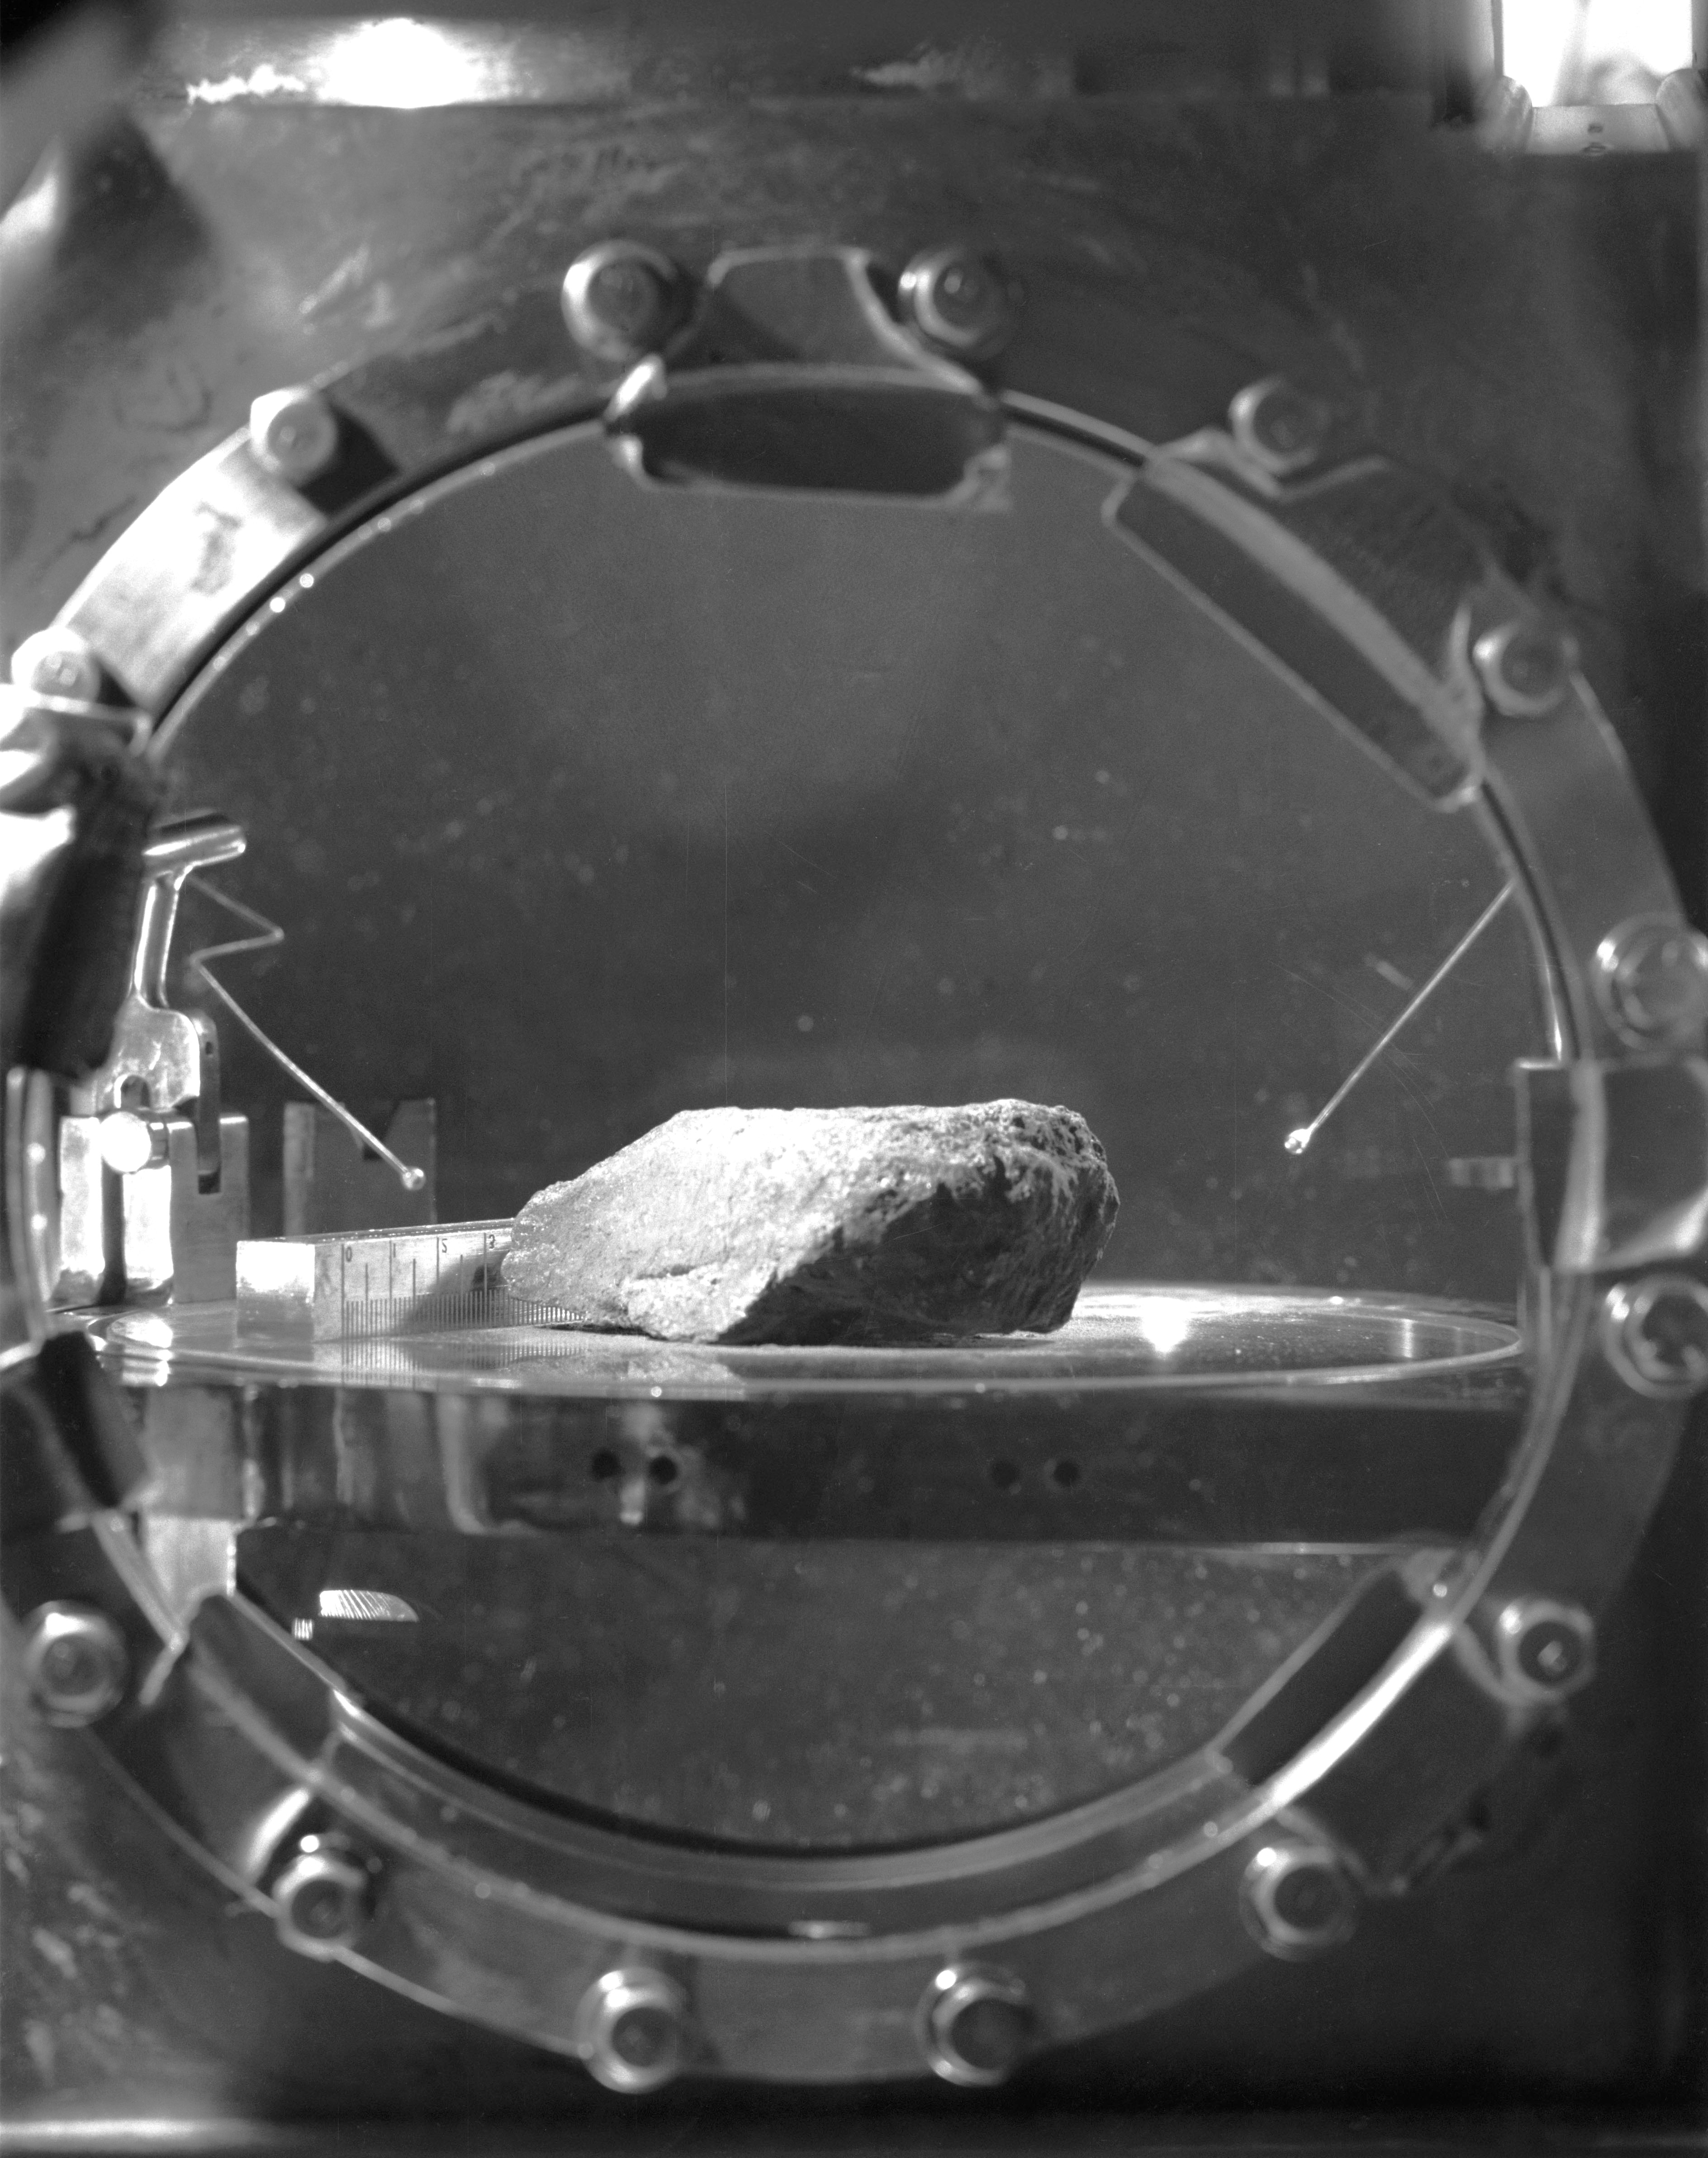 The first rock to be documented, less than 48 hours after splashdown